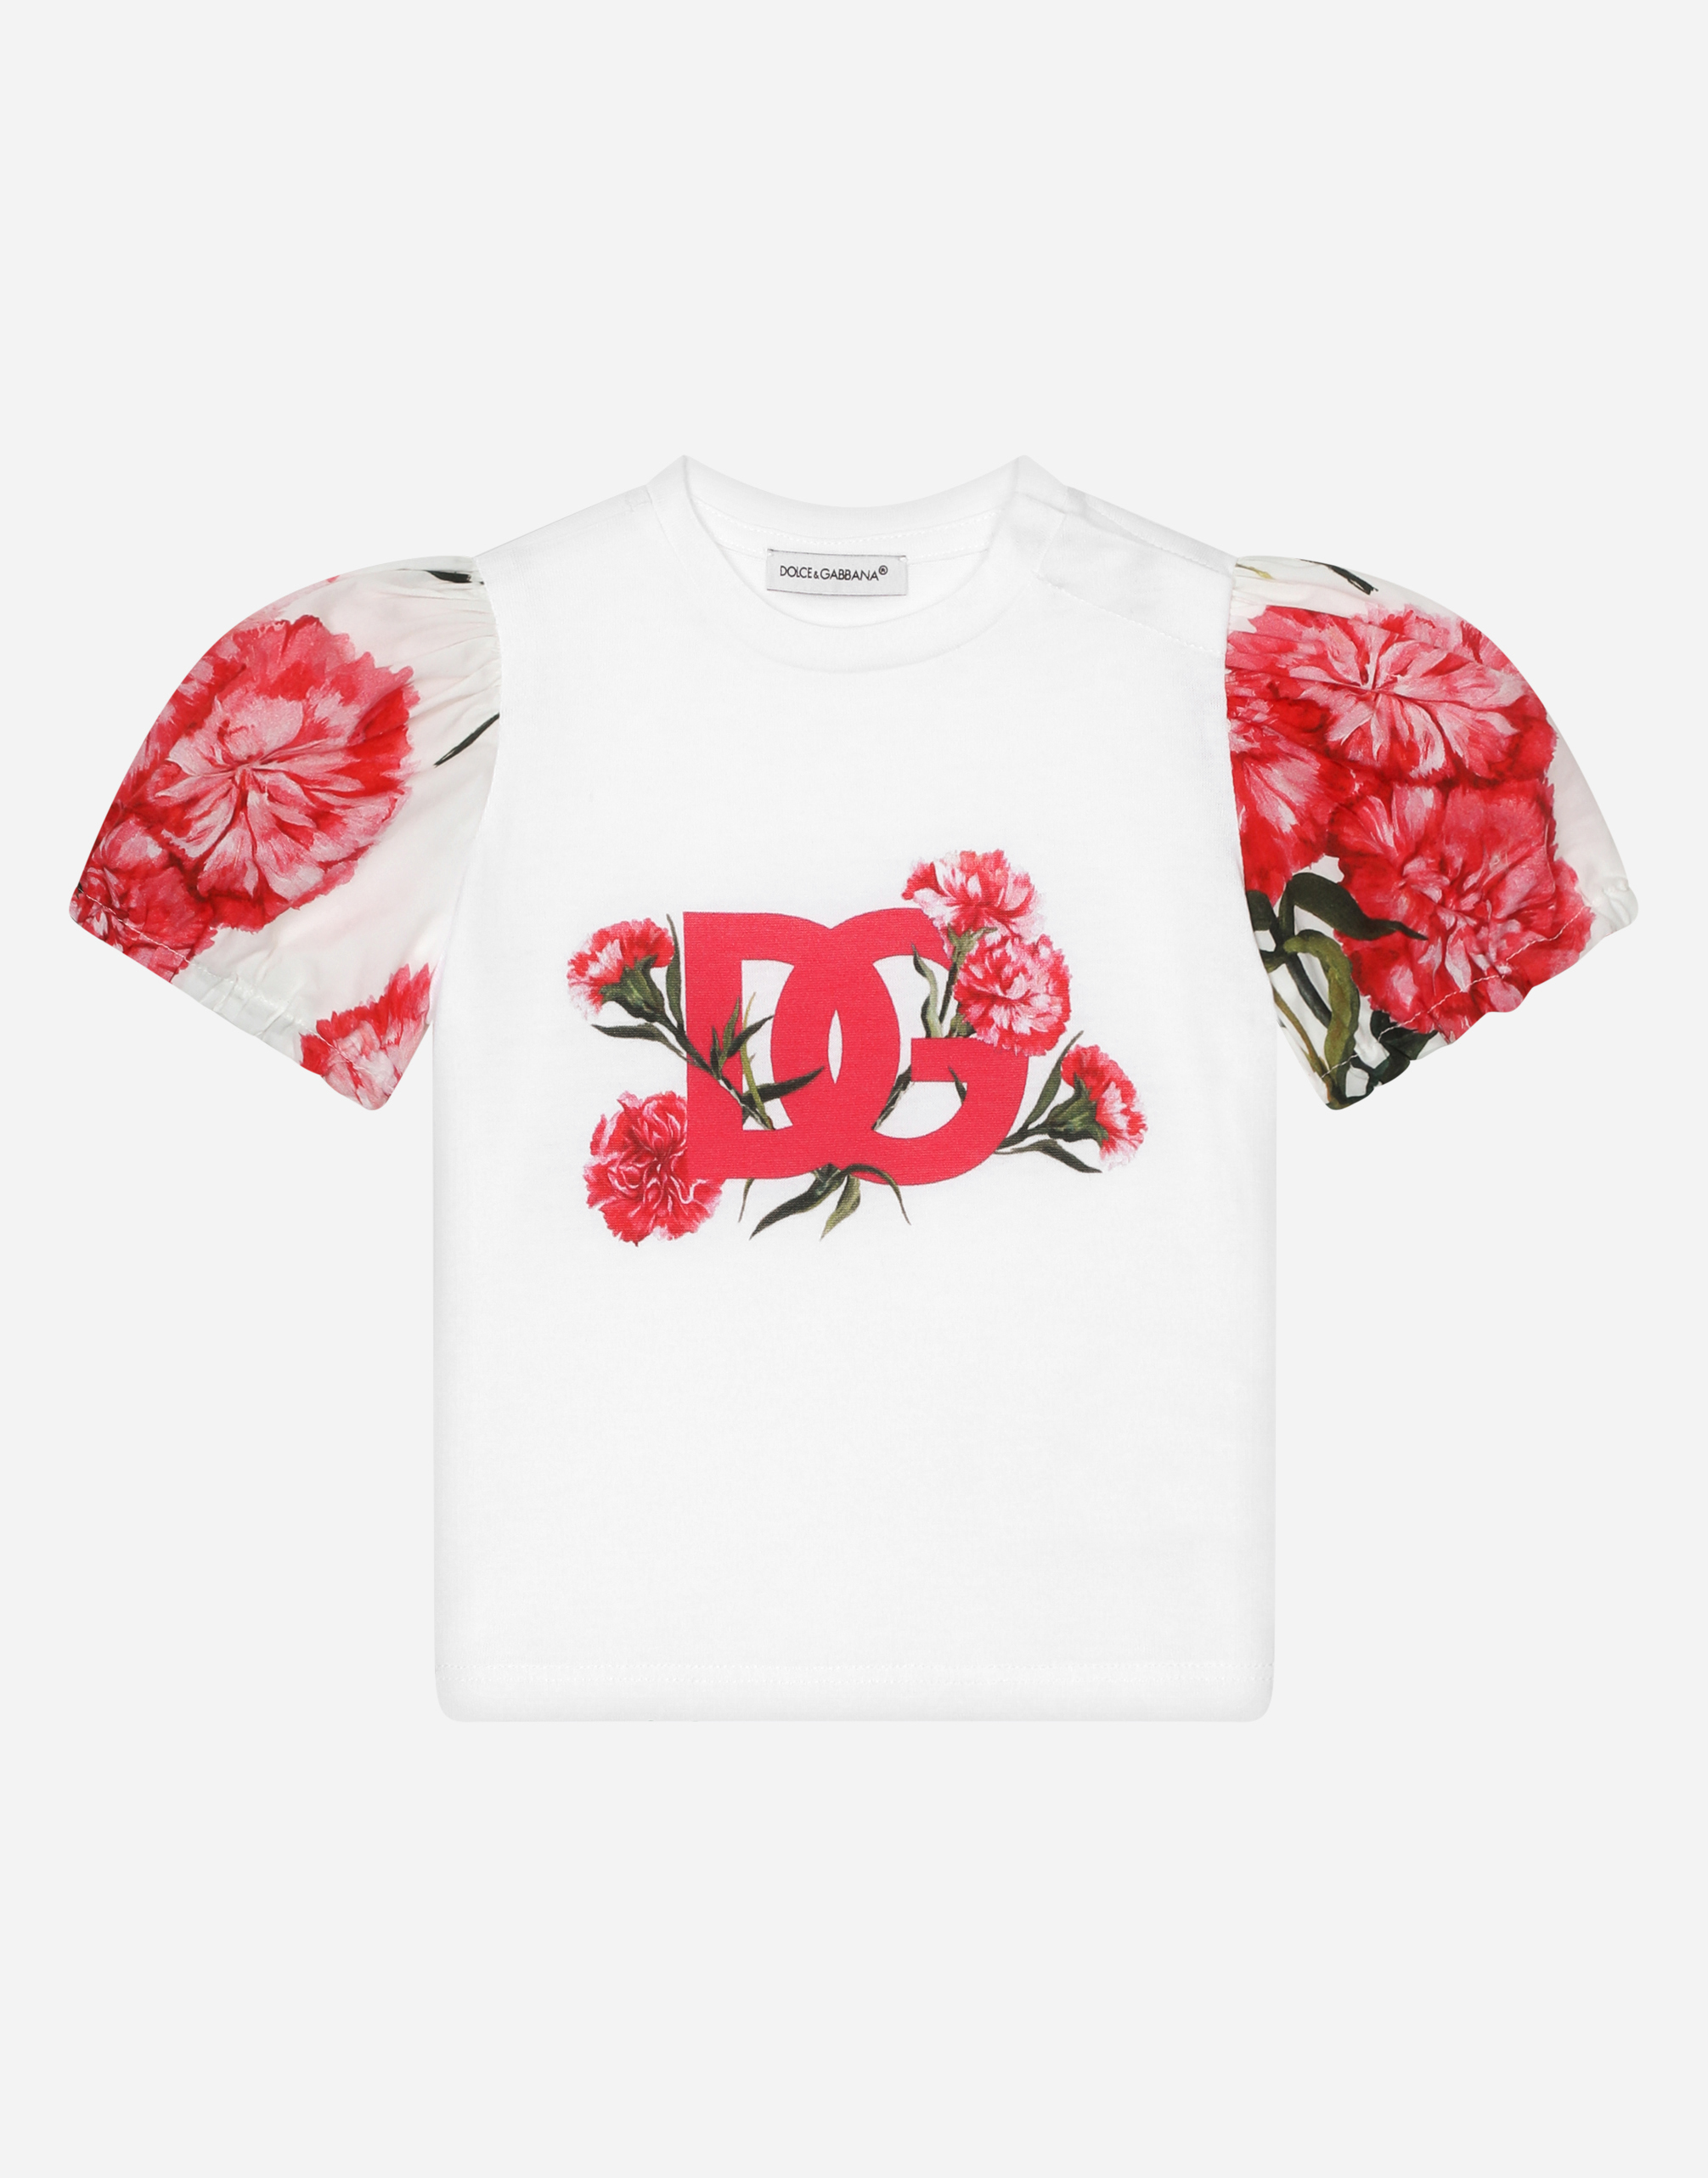 Carnation-print poplin and jersey T-shirt in Multicolor